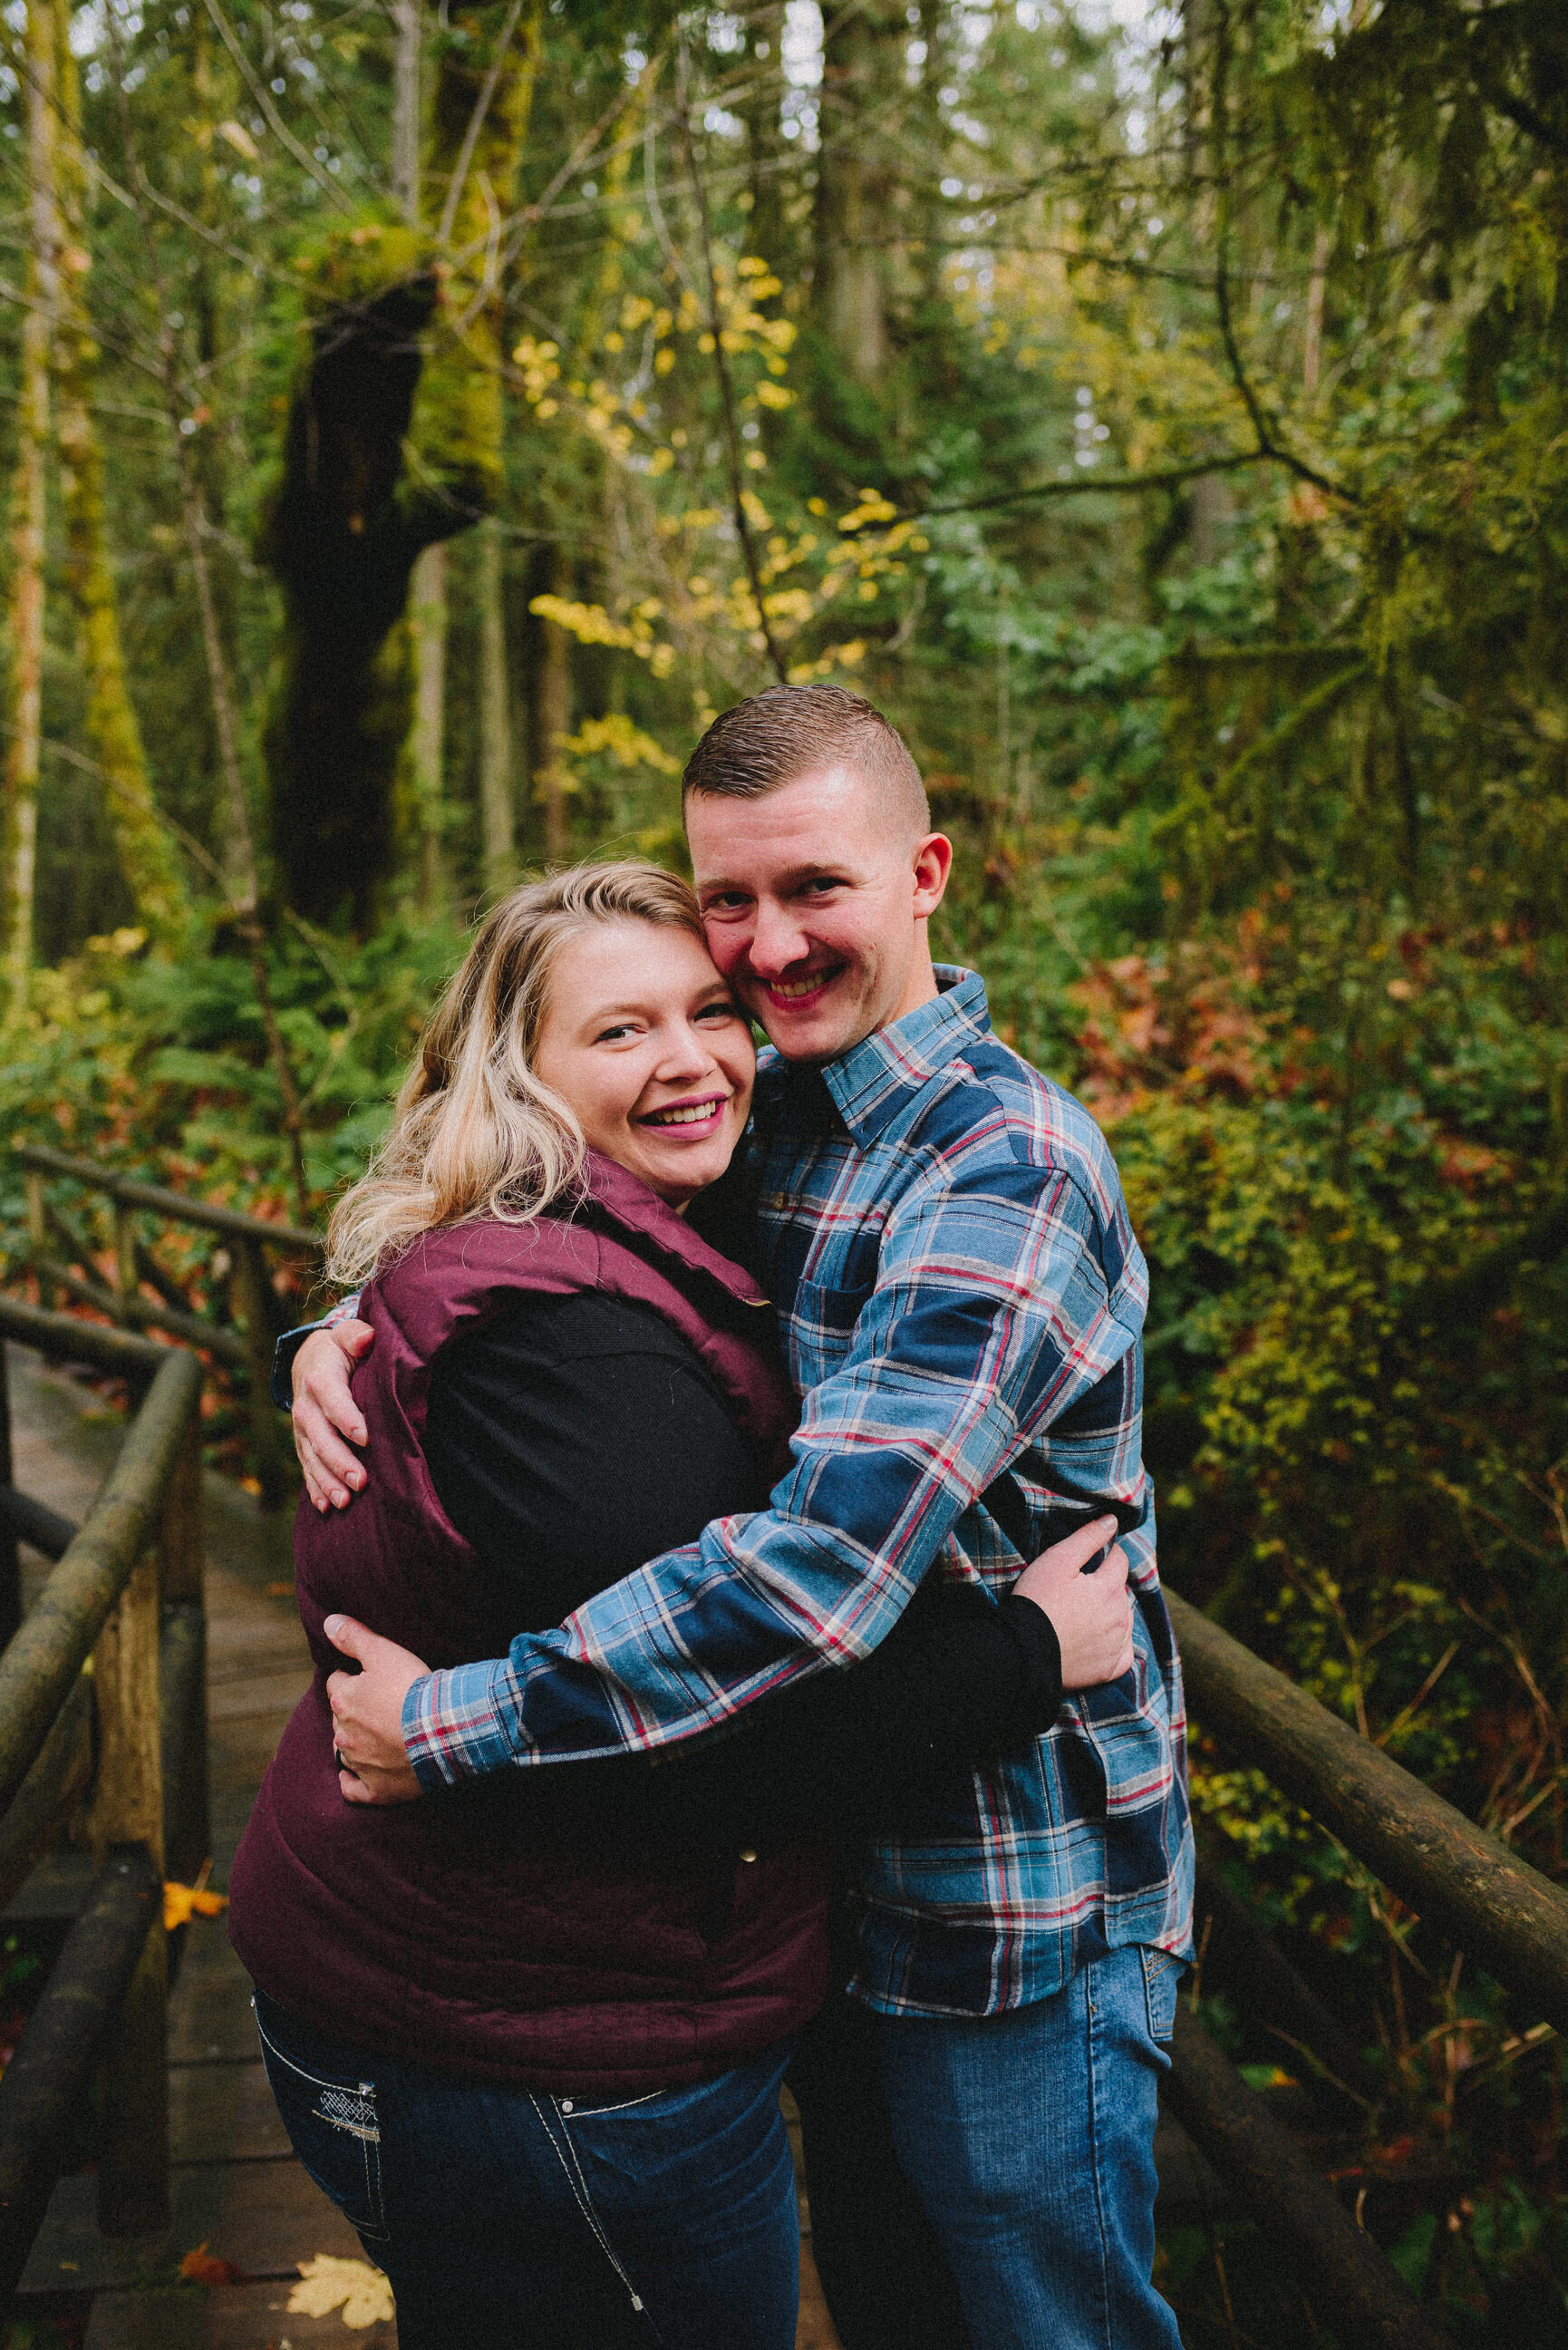 priest-point-park-couples-session-olympia-washington-way-up-north-photography (3).jpg